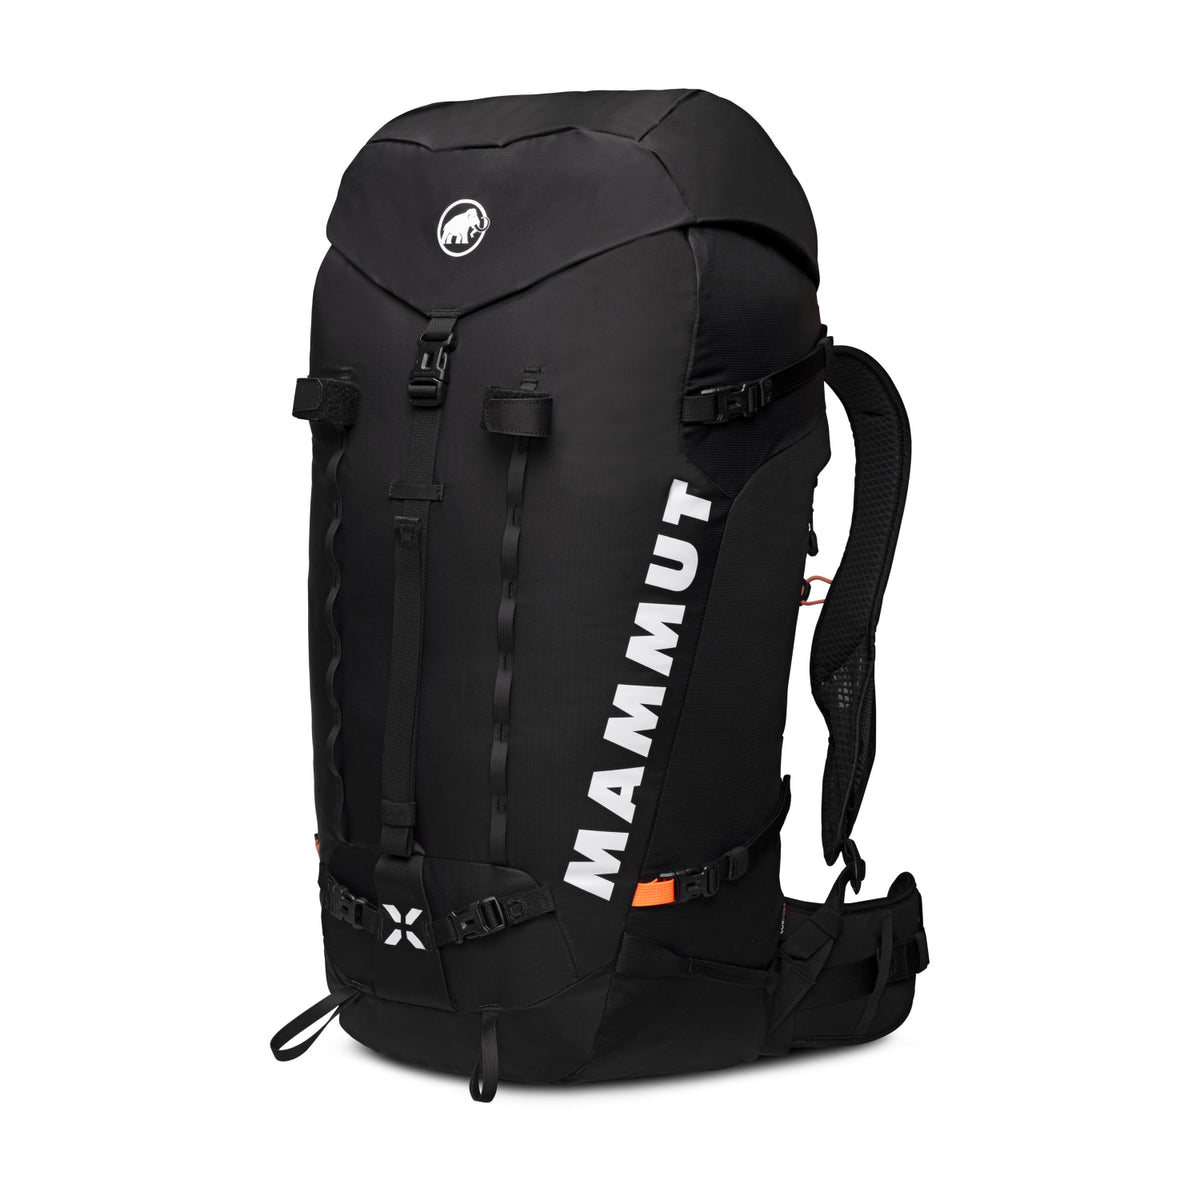 Mammut Trion Nordwand 38 black - front view showing attachment straps